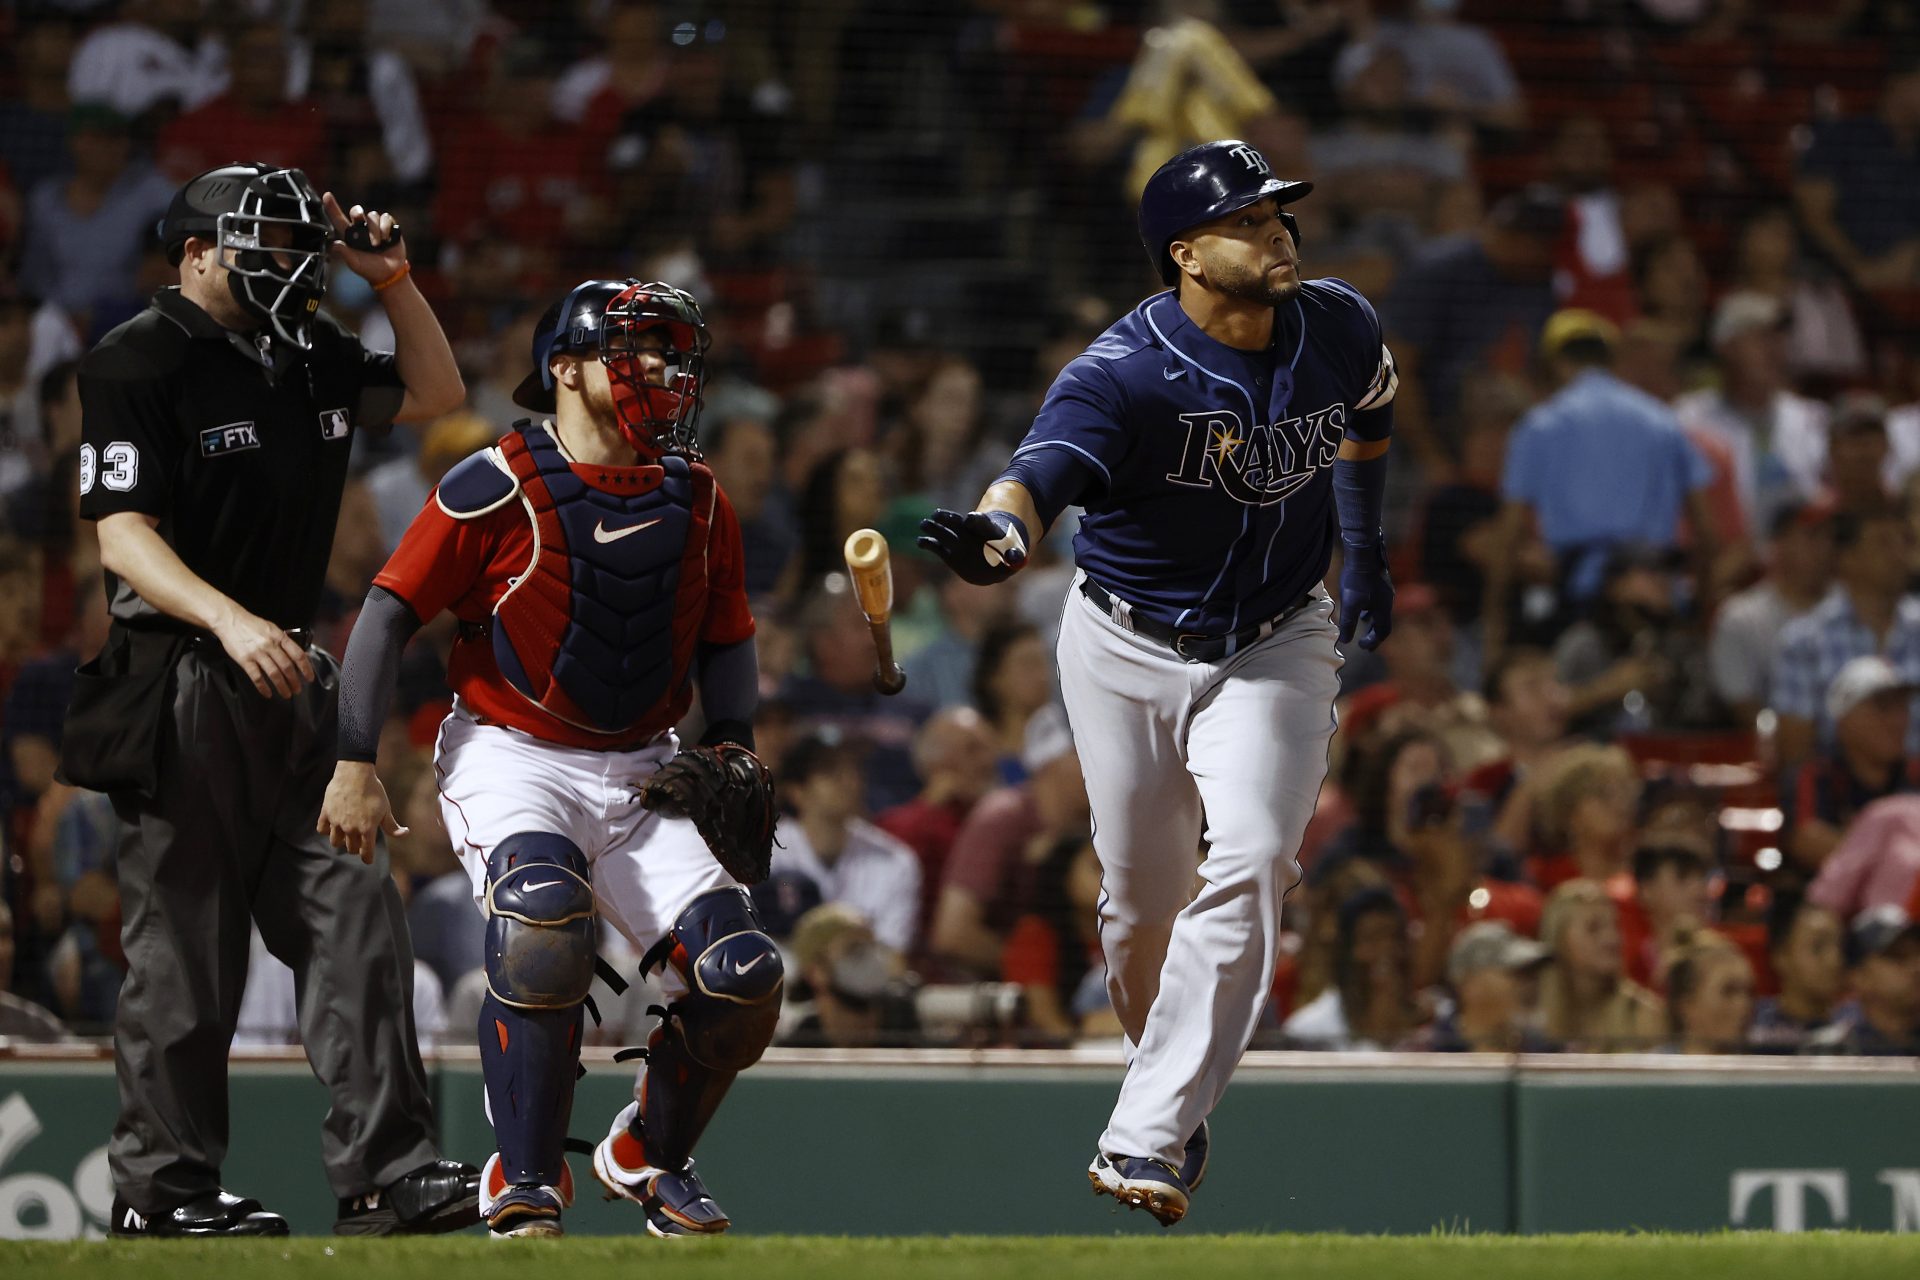 Video: Rays’ Nelson Cruz Becomes Oldest Player to Hit 30 HR in Season